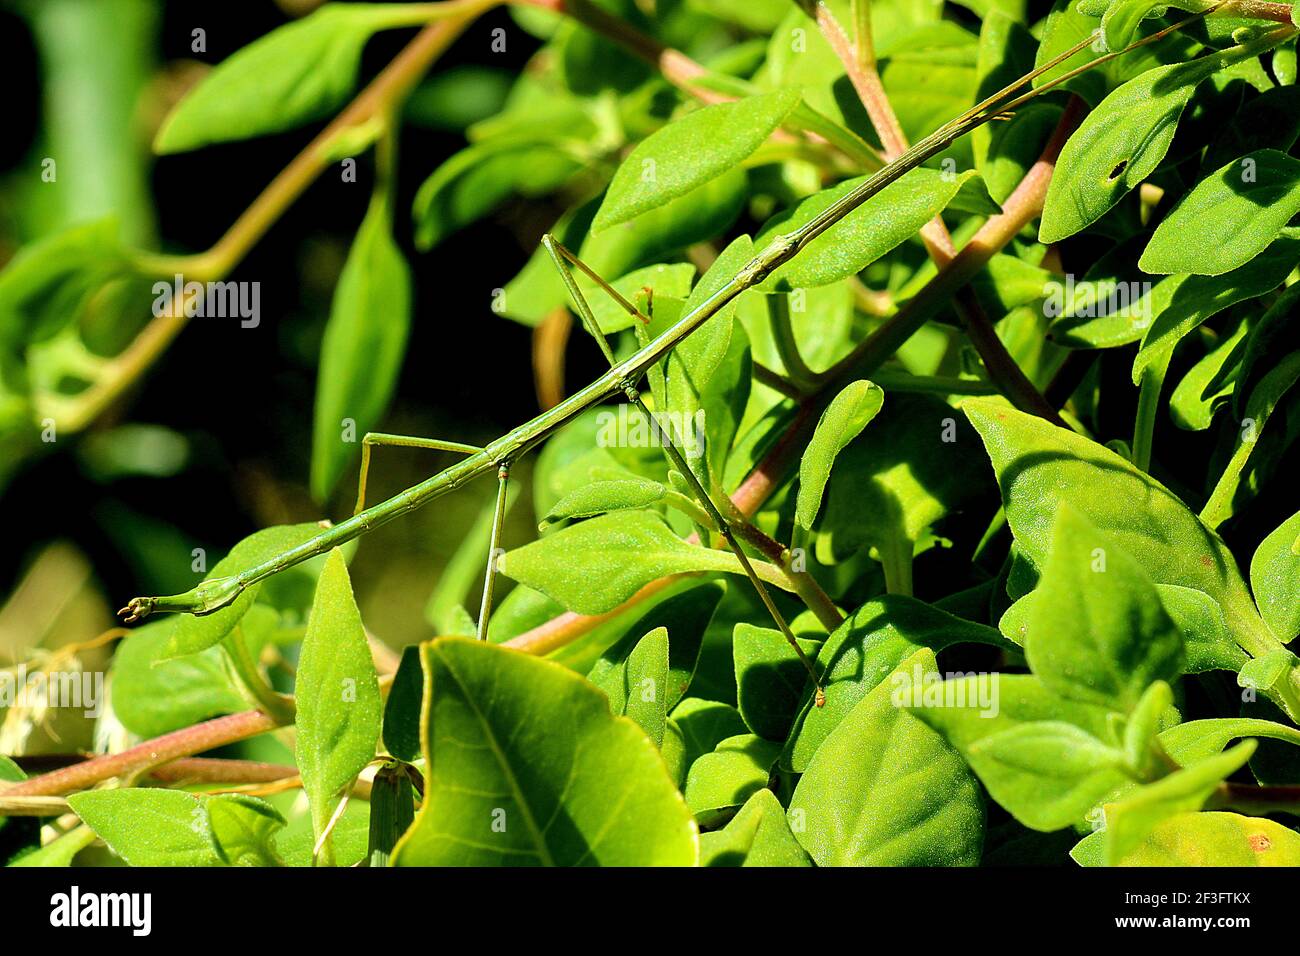 Smooth green stick insect (Clitarchus hookeri) on NZ spinach plant (Tetragonia) Stock Photo